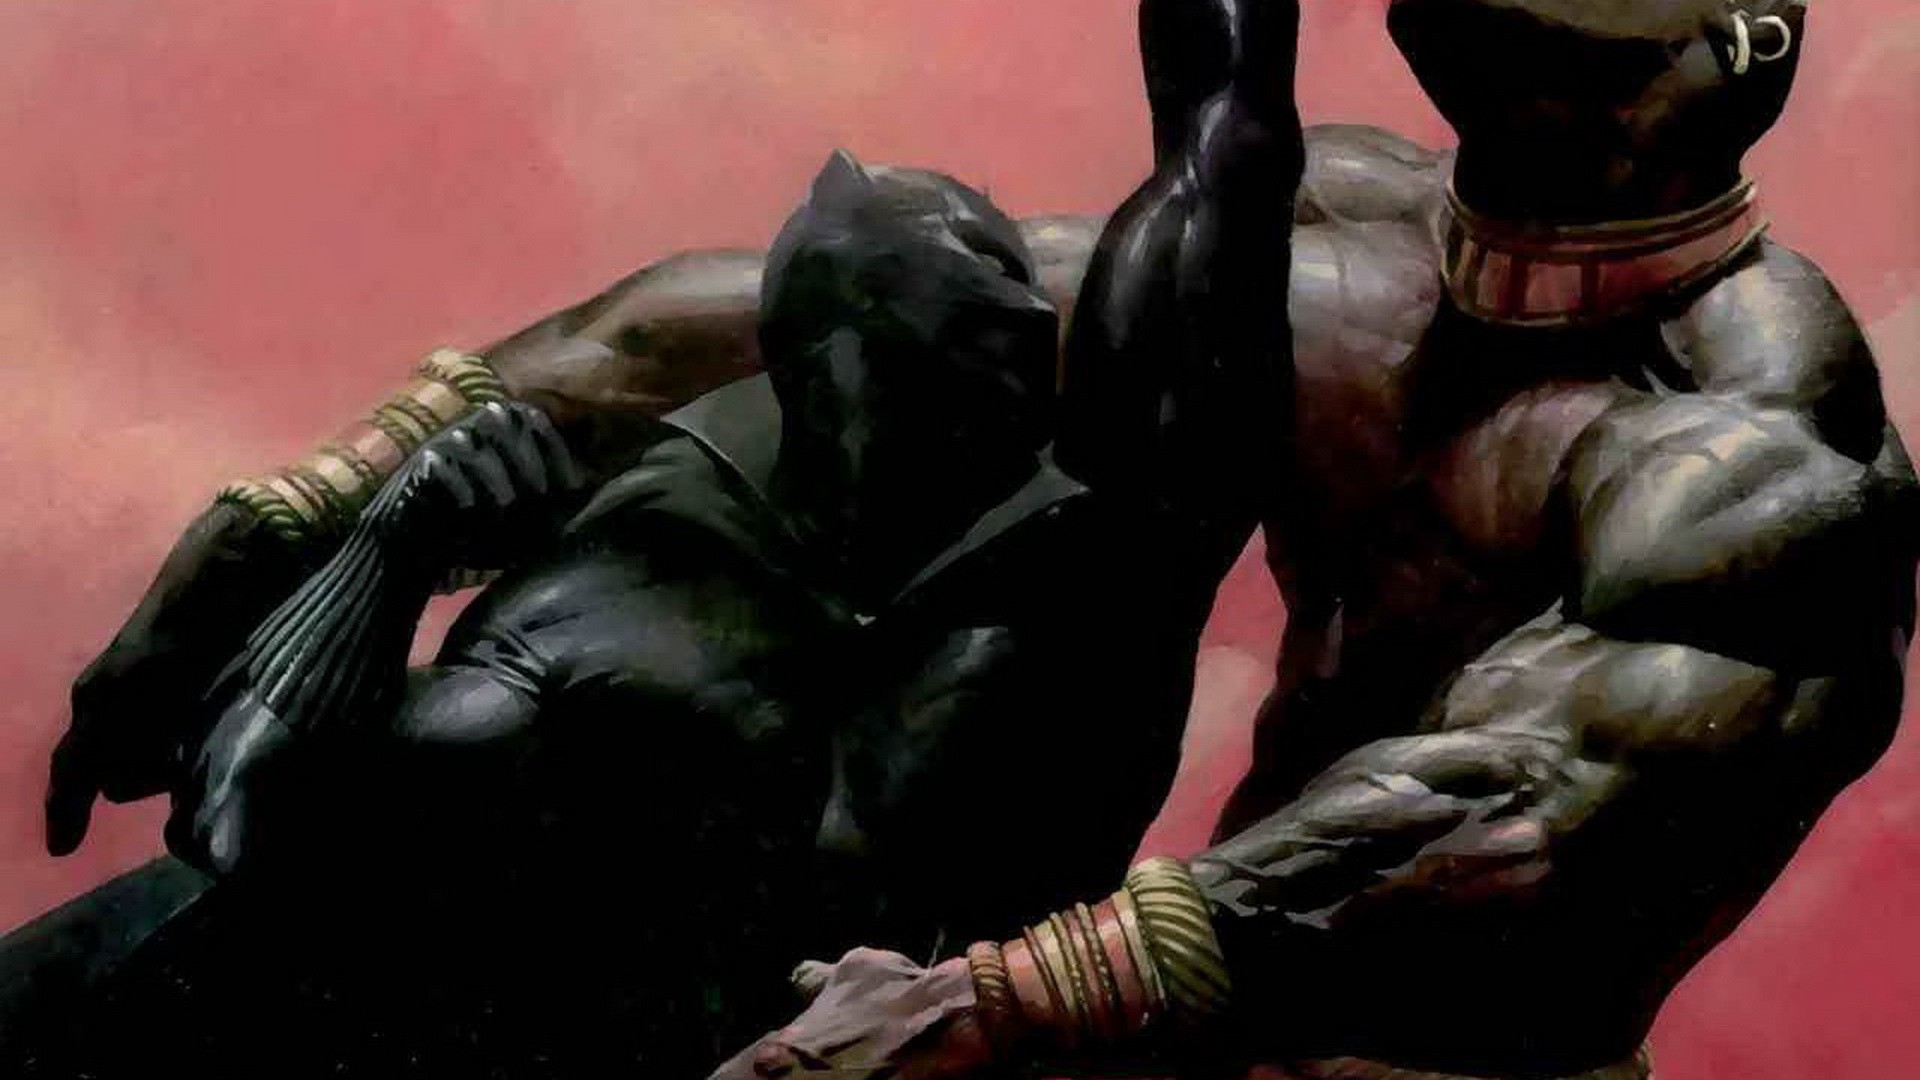 black panther marvel hd wallpaper,action adventure game,fictional character,cg artwork,supervillain,pc game